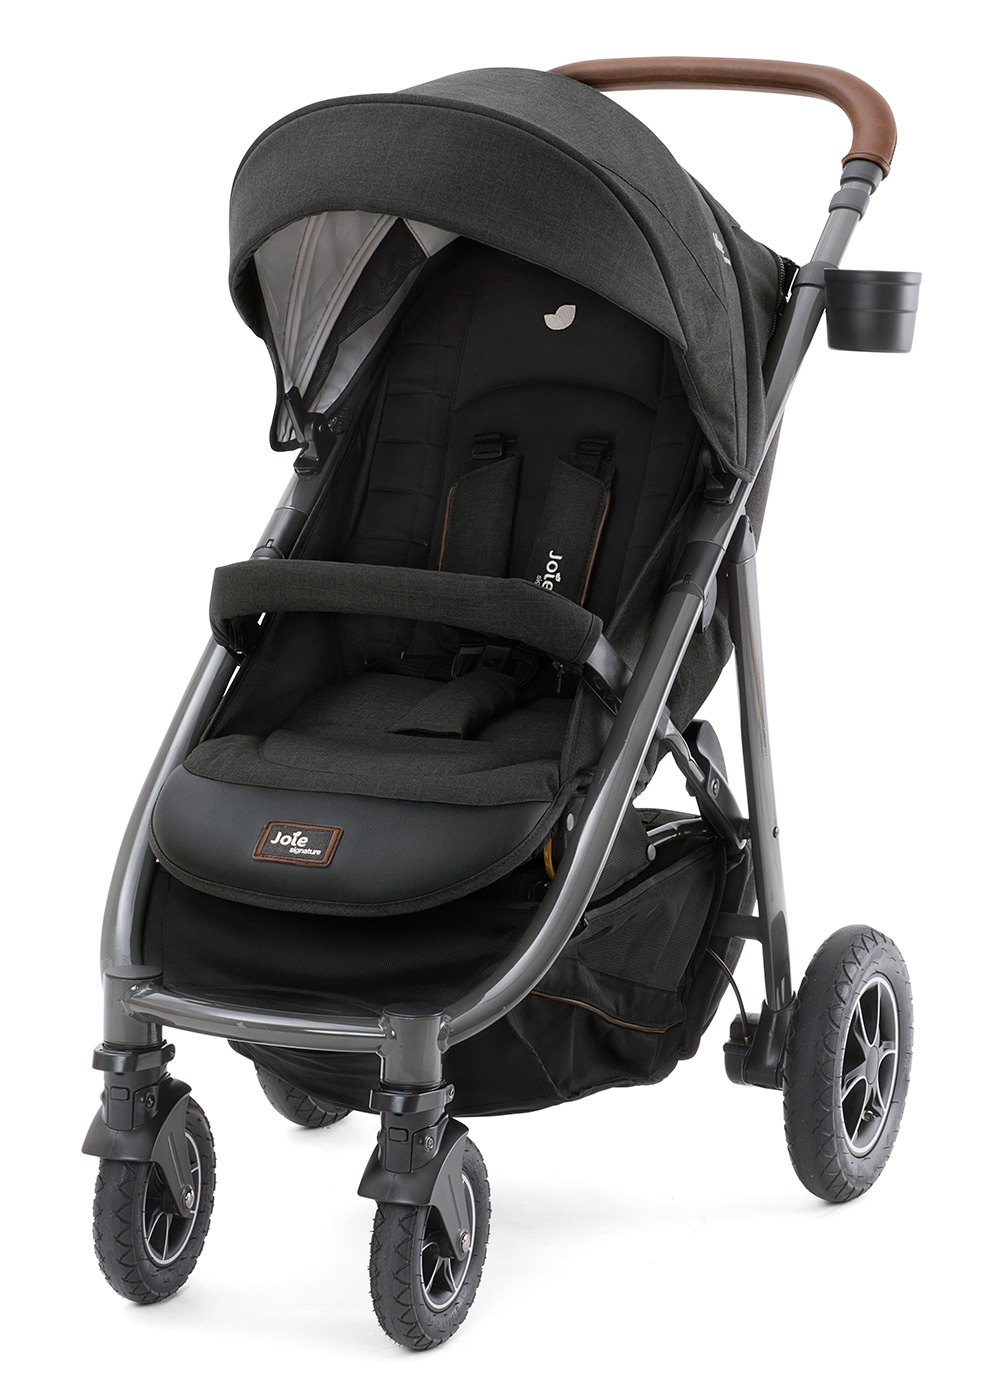 Joie Signature stroller reviews, dimensions | pushchair experts advise @Strollberry